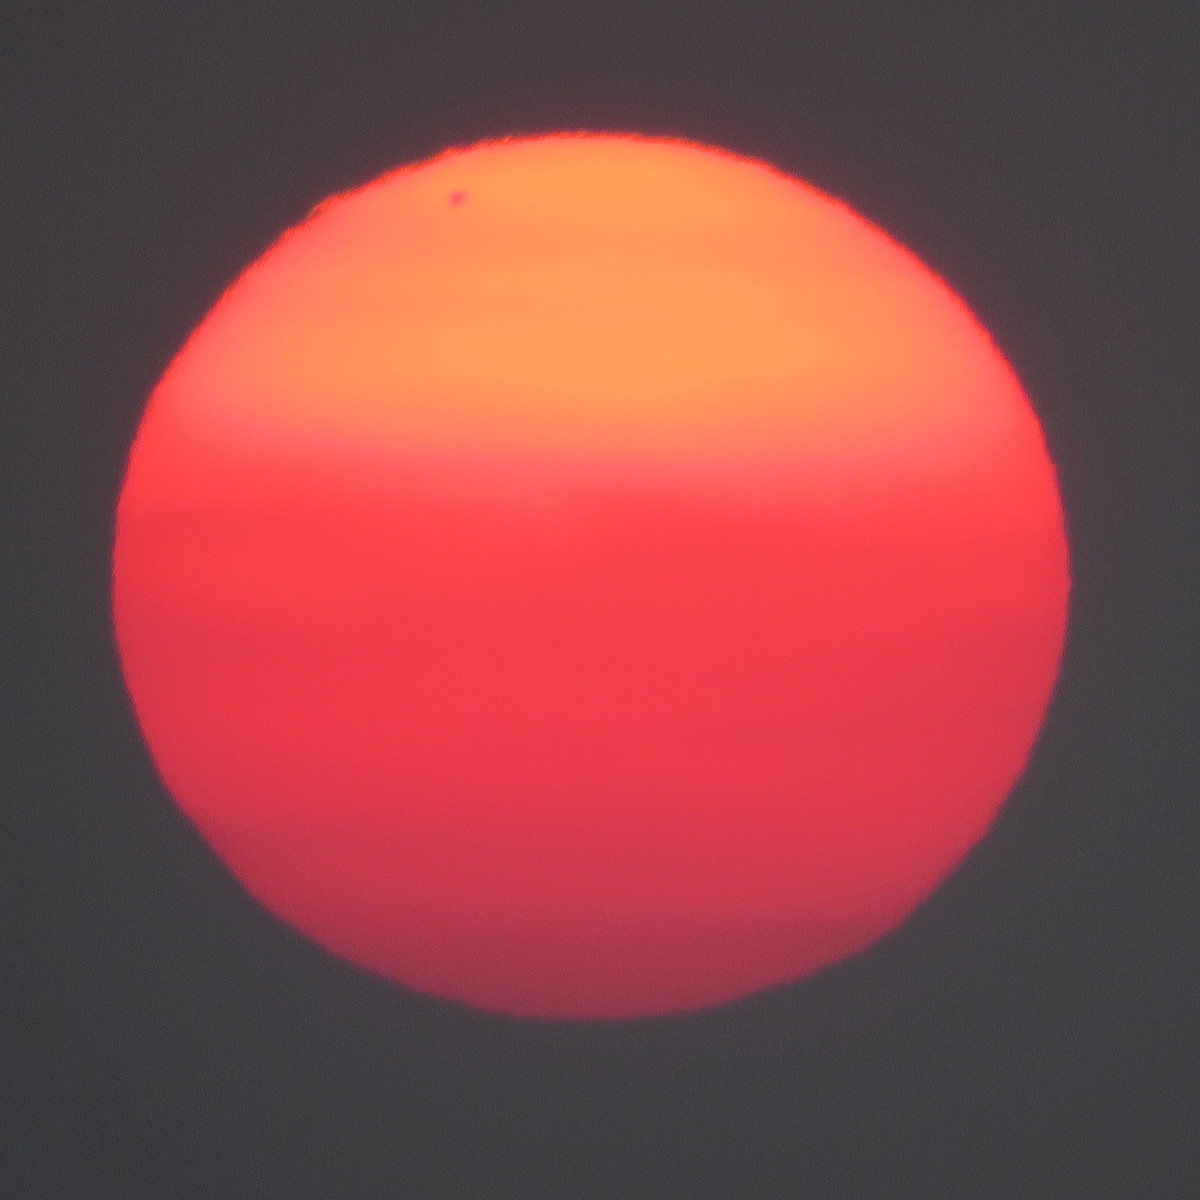 Sunset with sunspot. 8th April 2019 from Irlam, UK